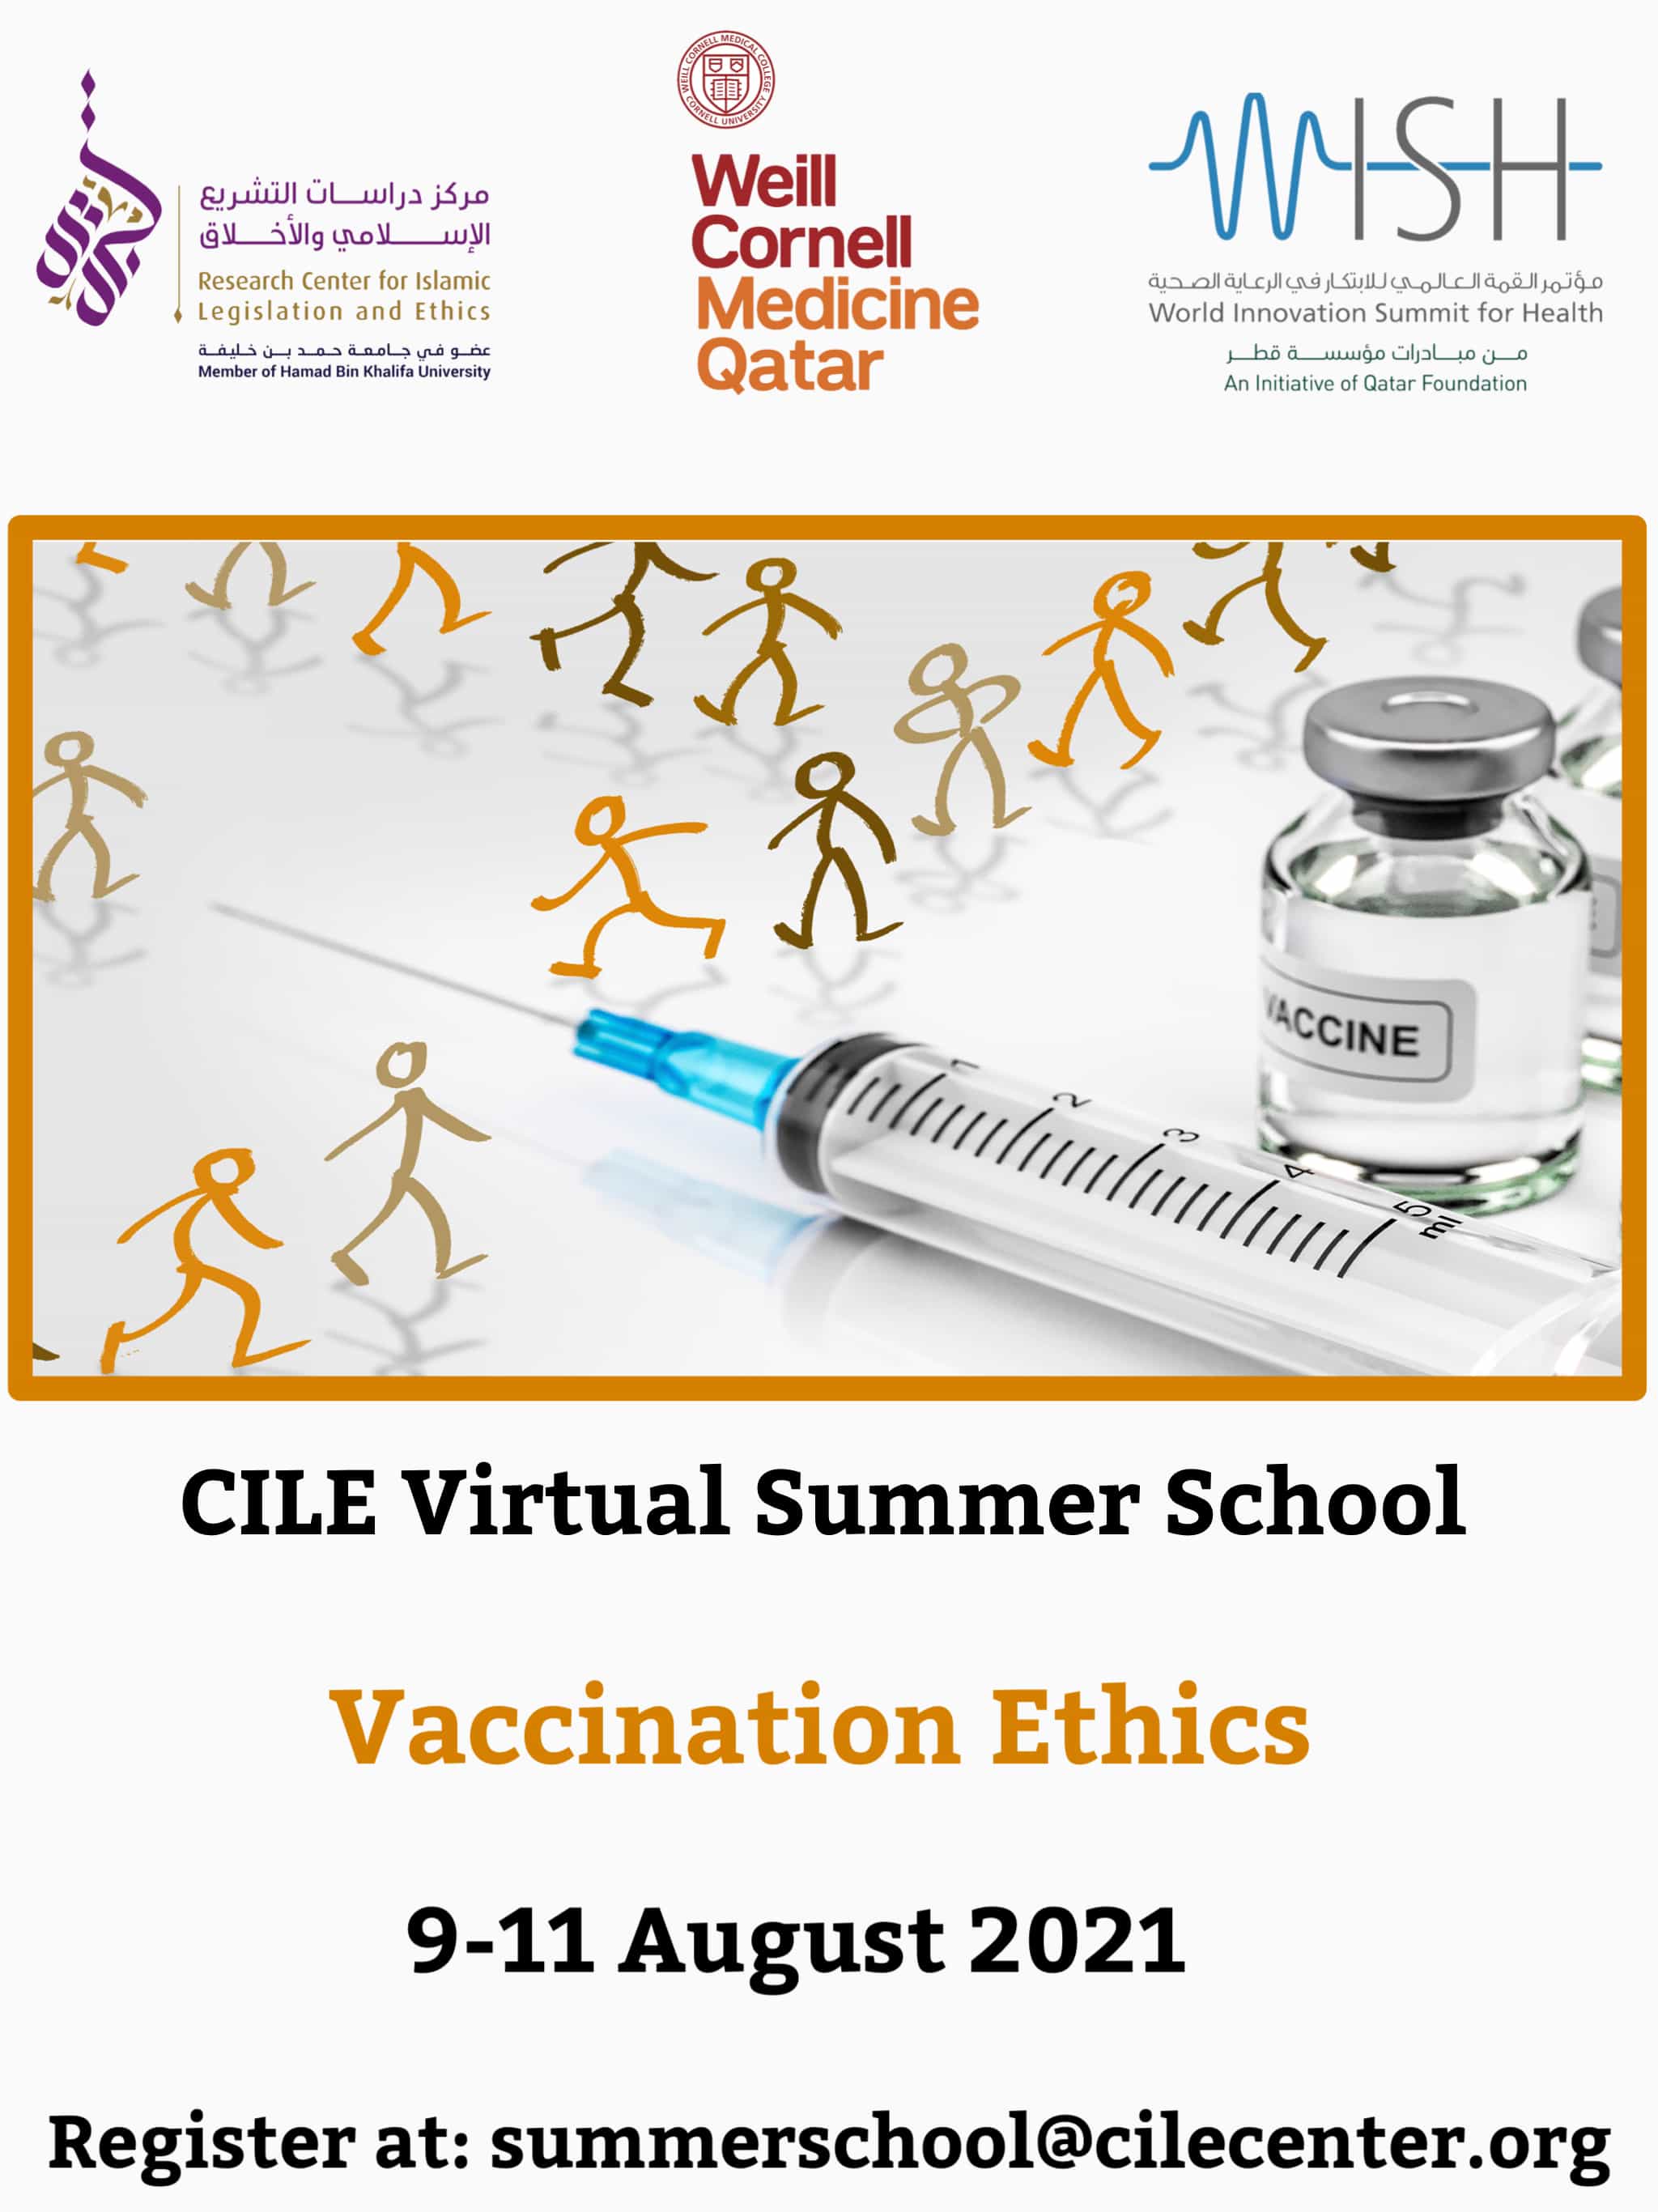 08/2021 CILE Online Summer School 2021 on Vaccination Ethics